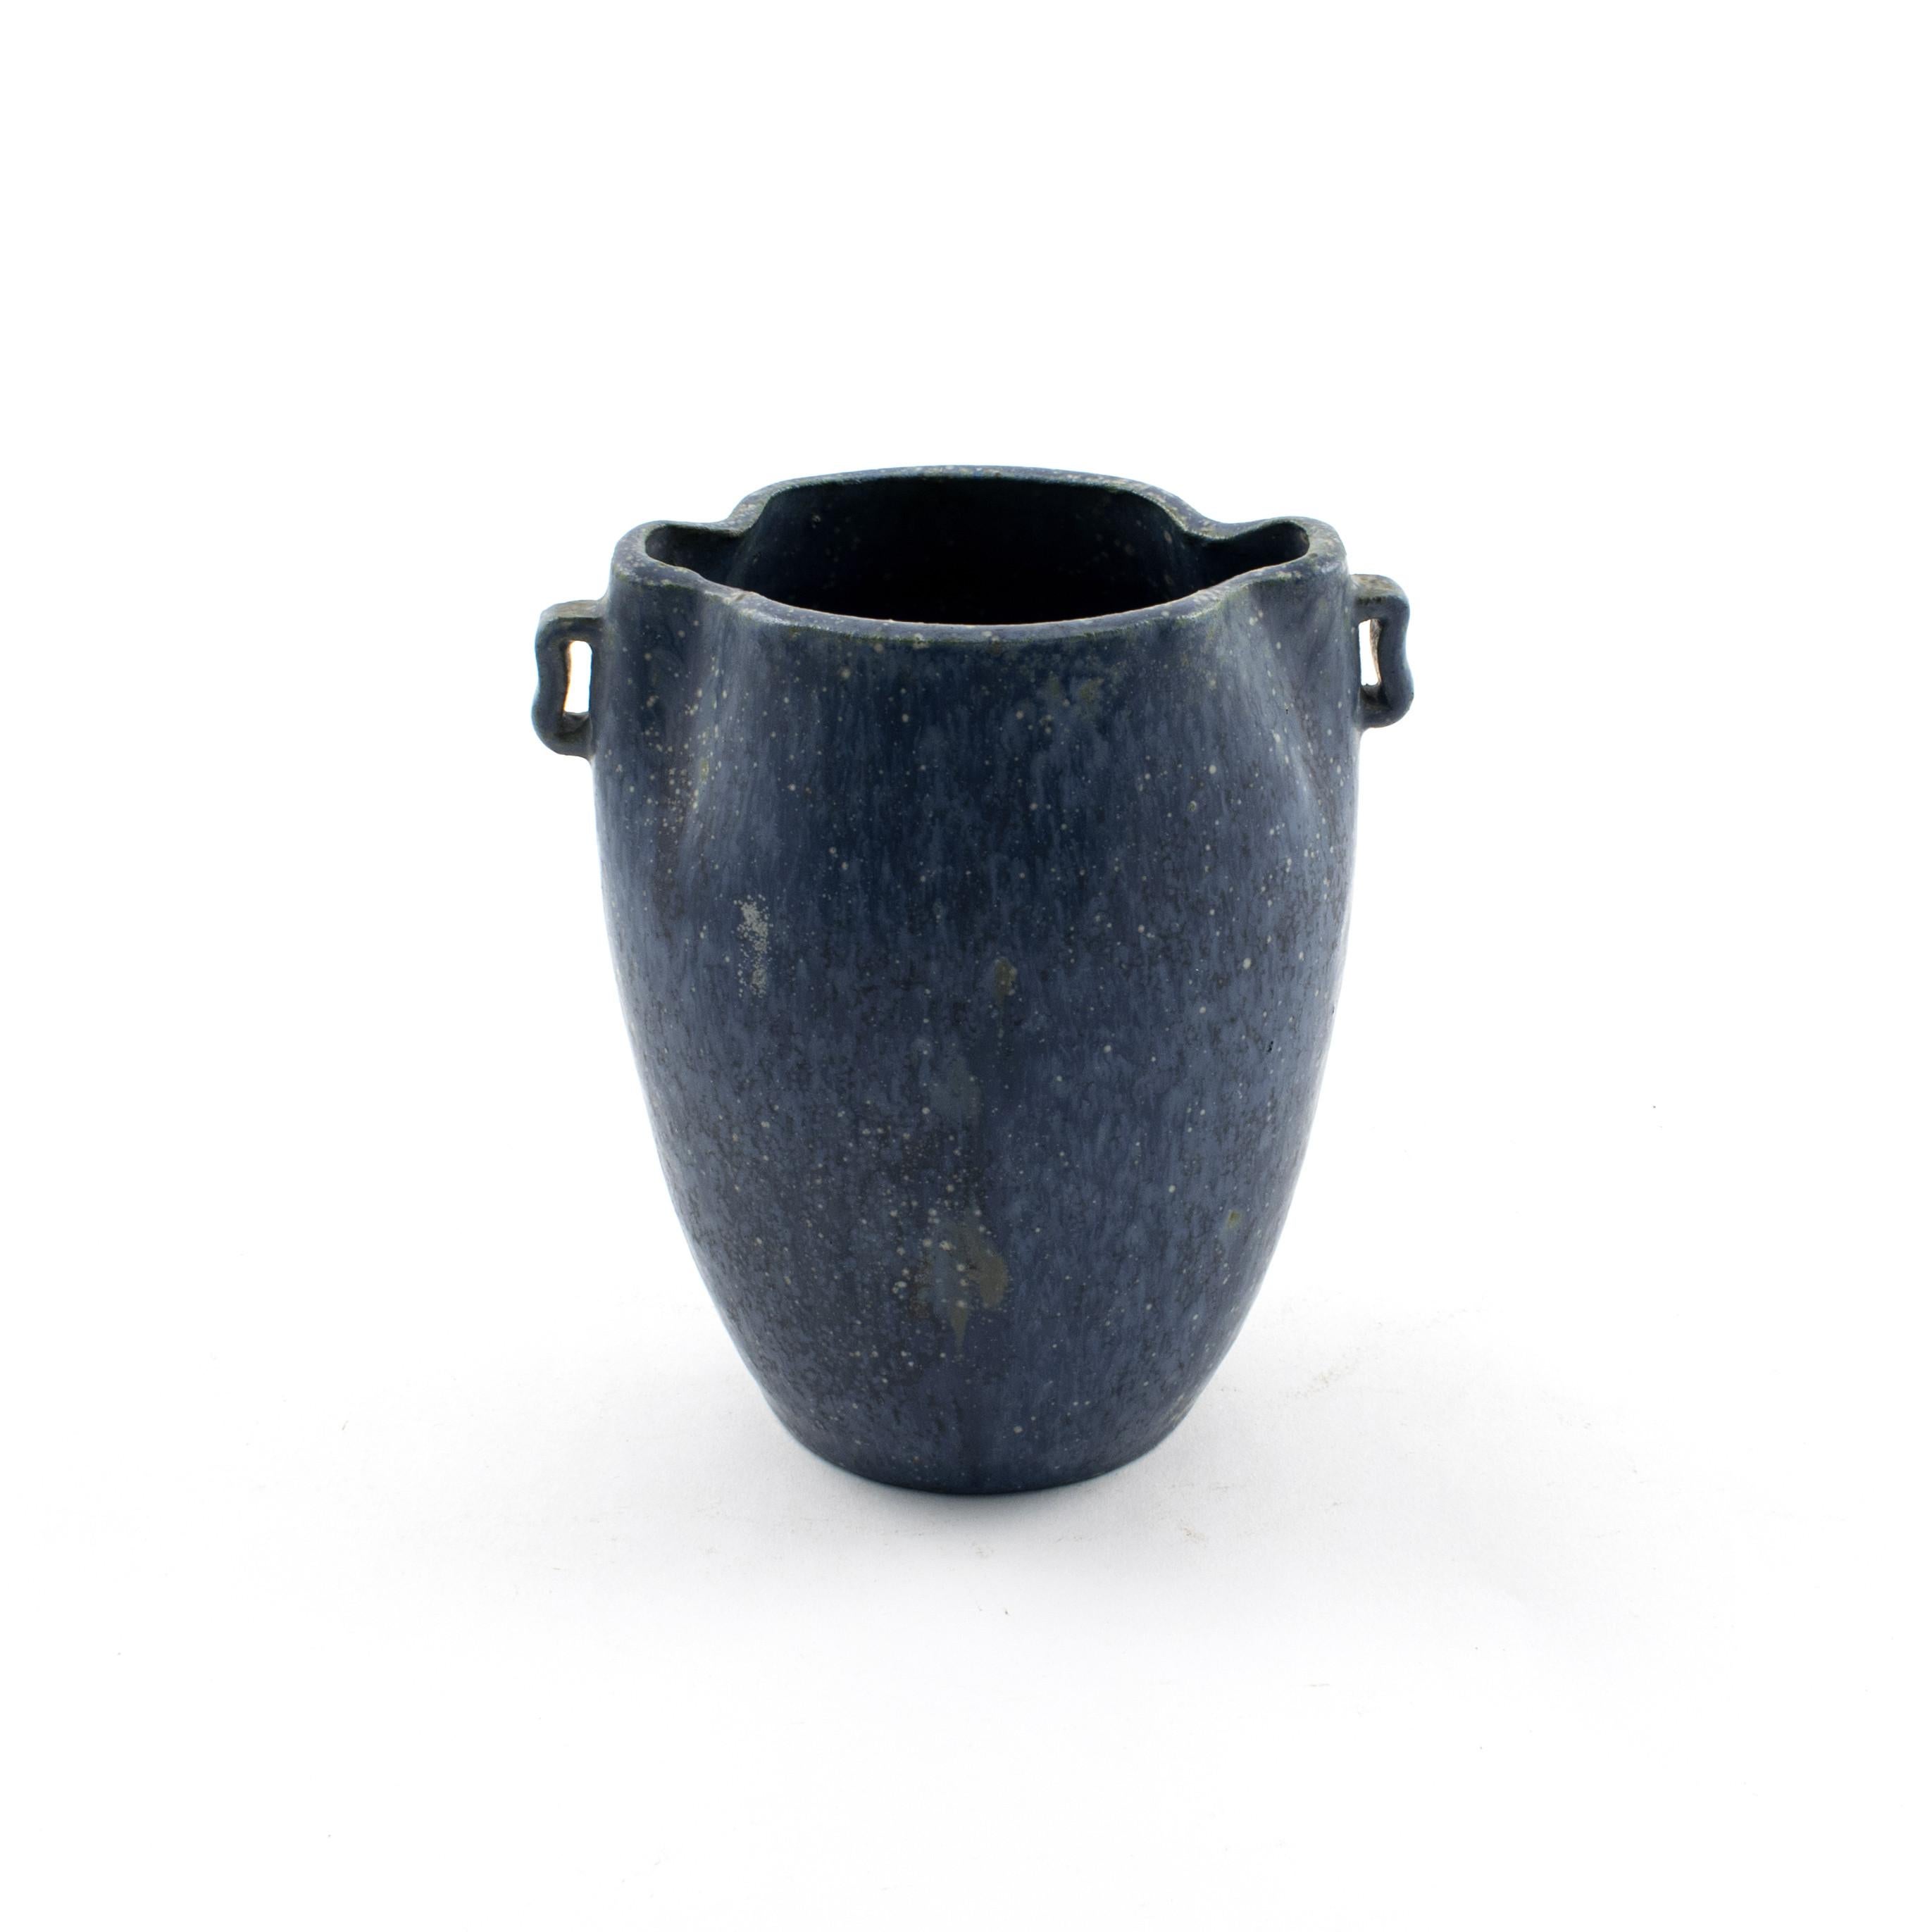 Stoneware vase by Arne Bang with small side handles.
Dark speckled blue matte glaze.
Signed with monogram AB.